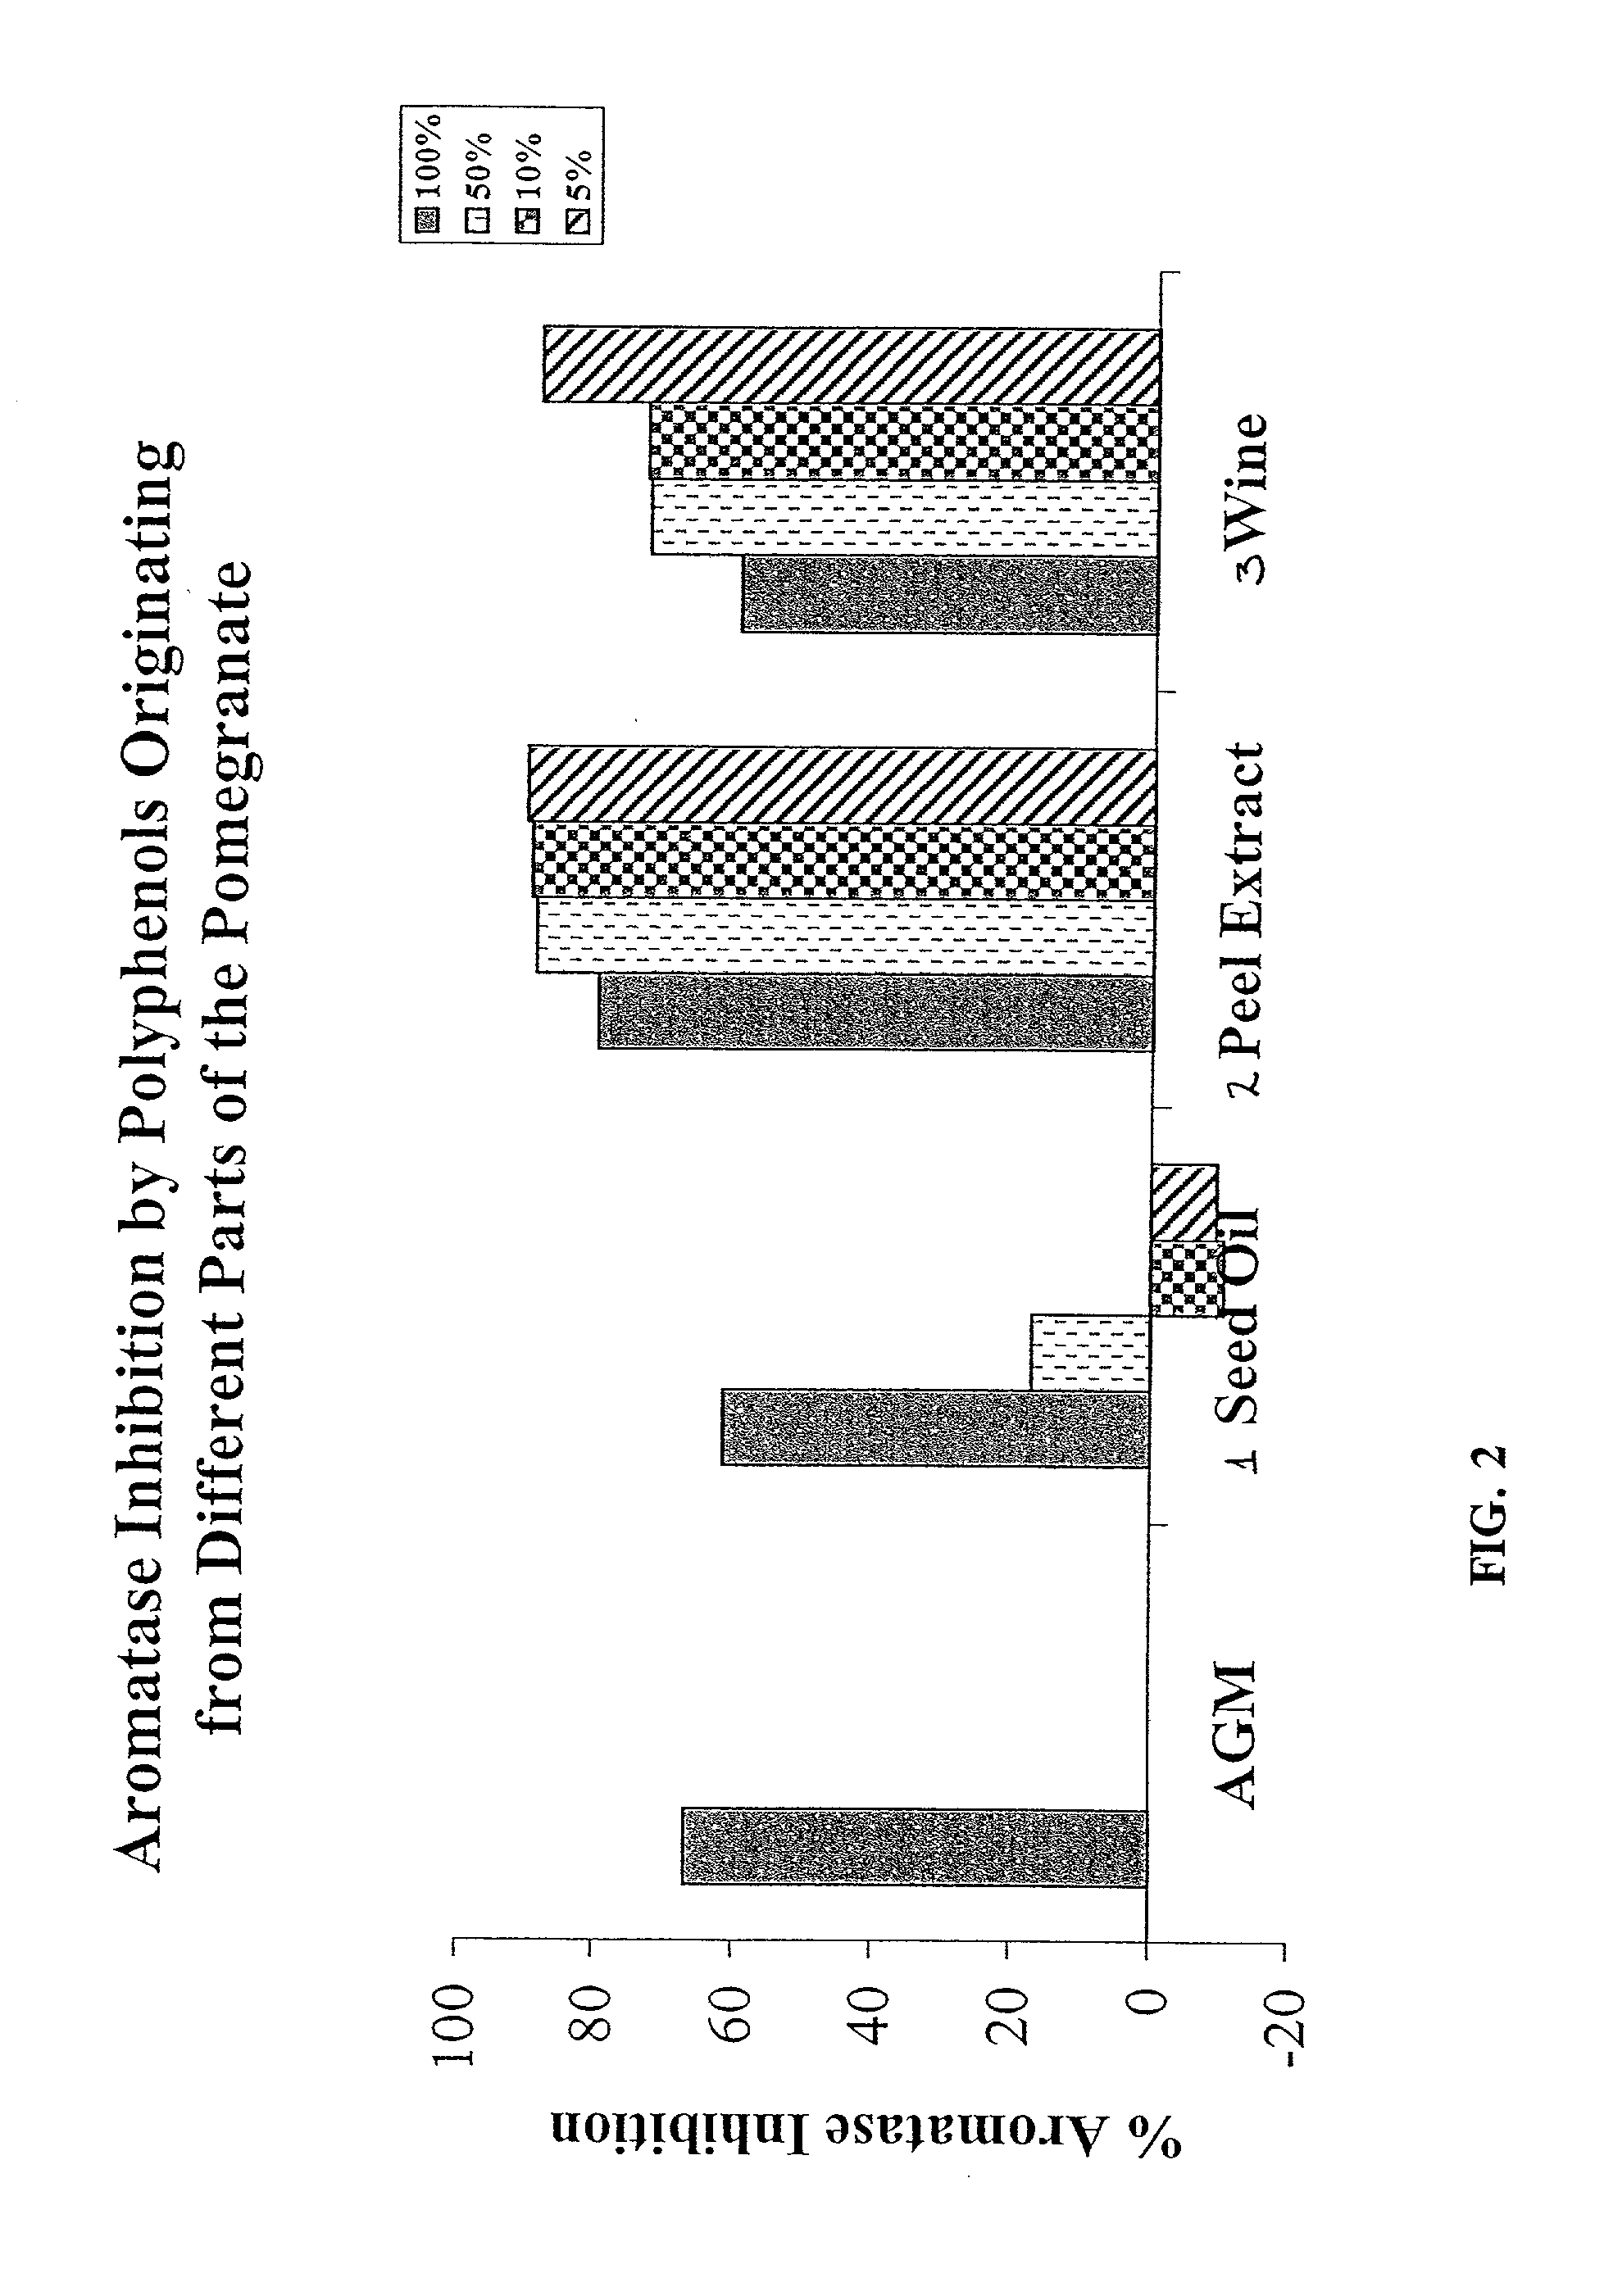 Pomegranate products useful in improving health and methods of use thereof